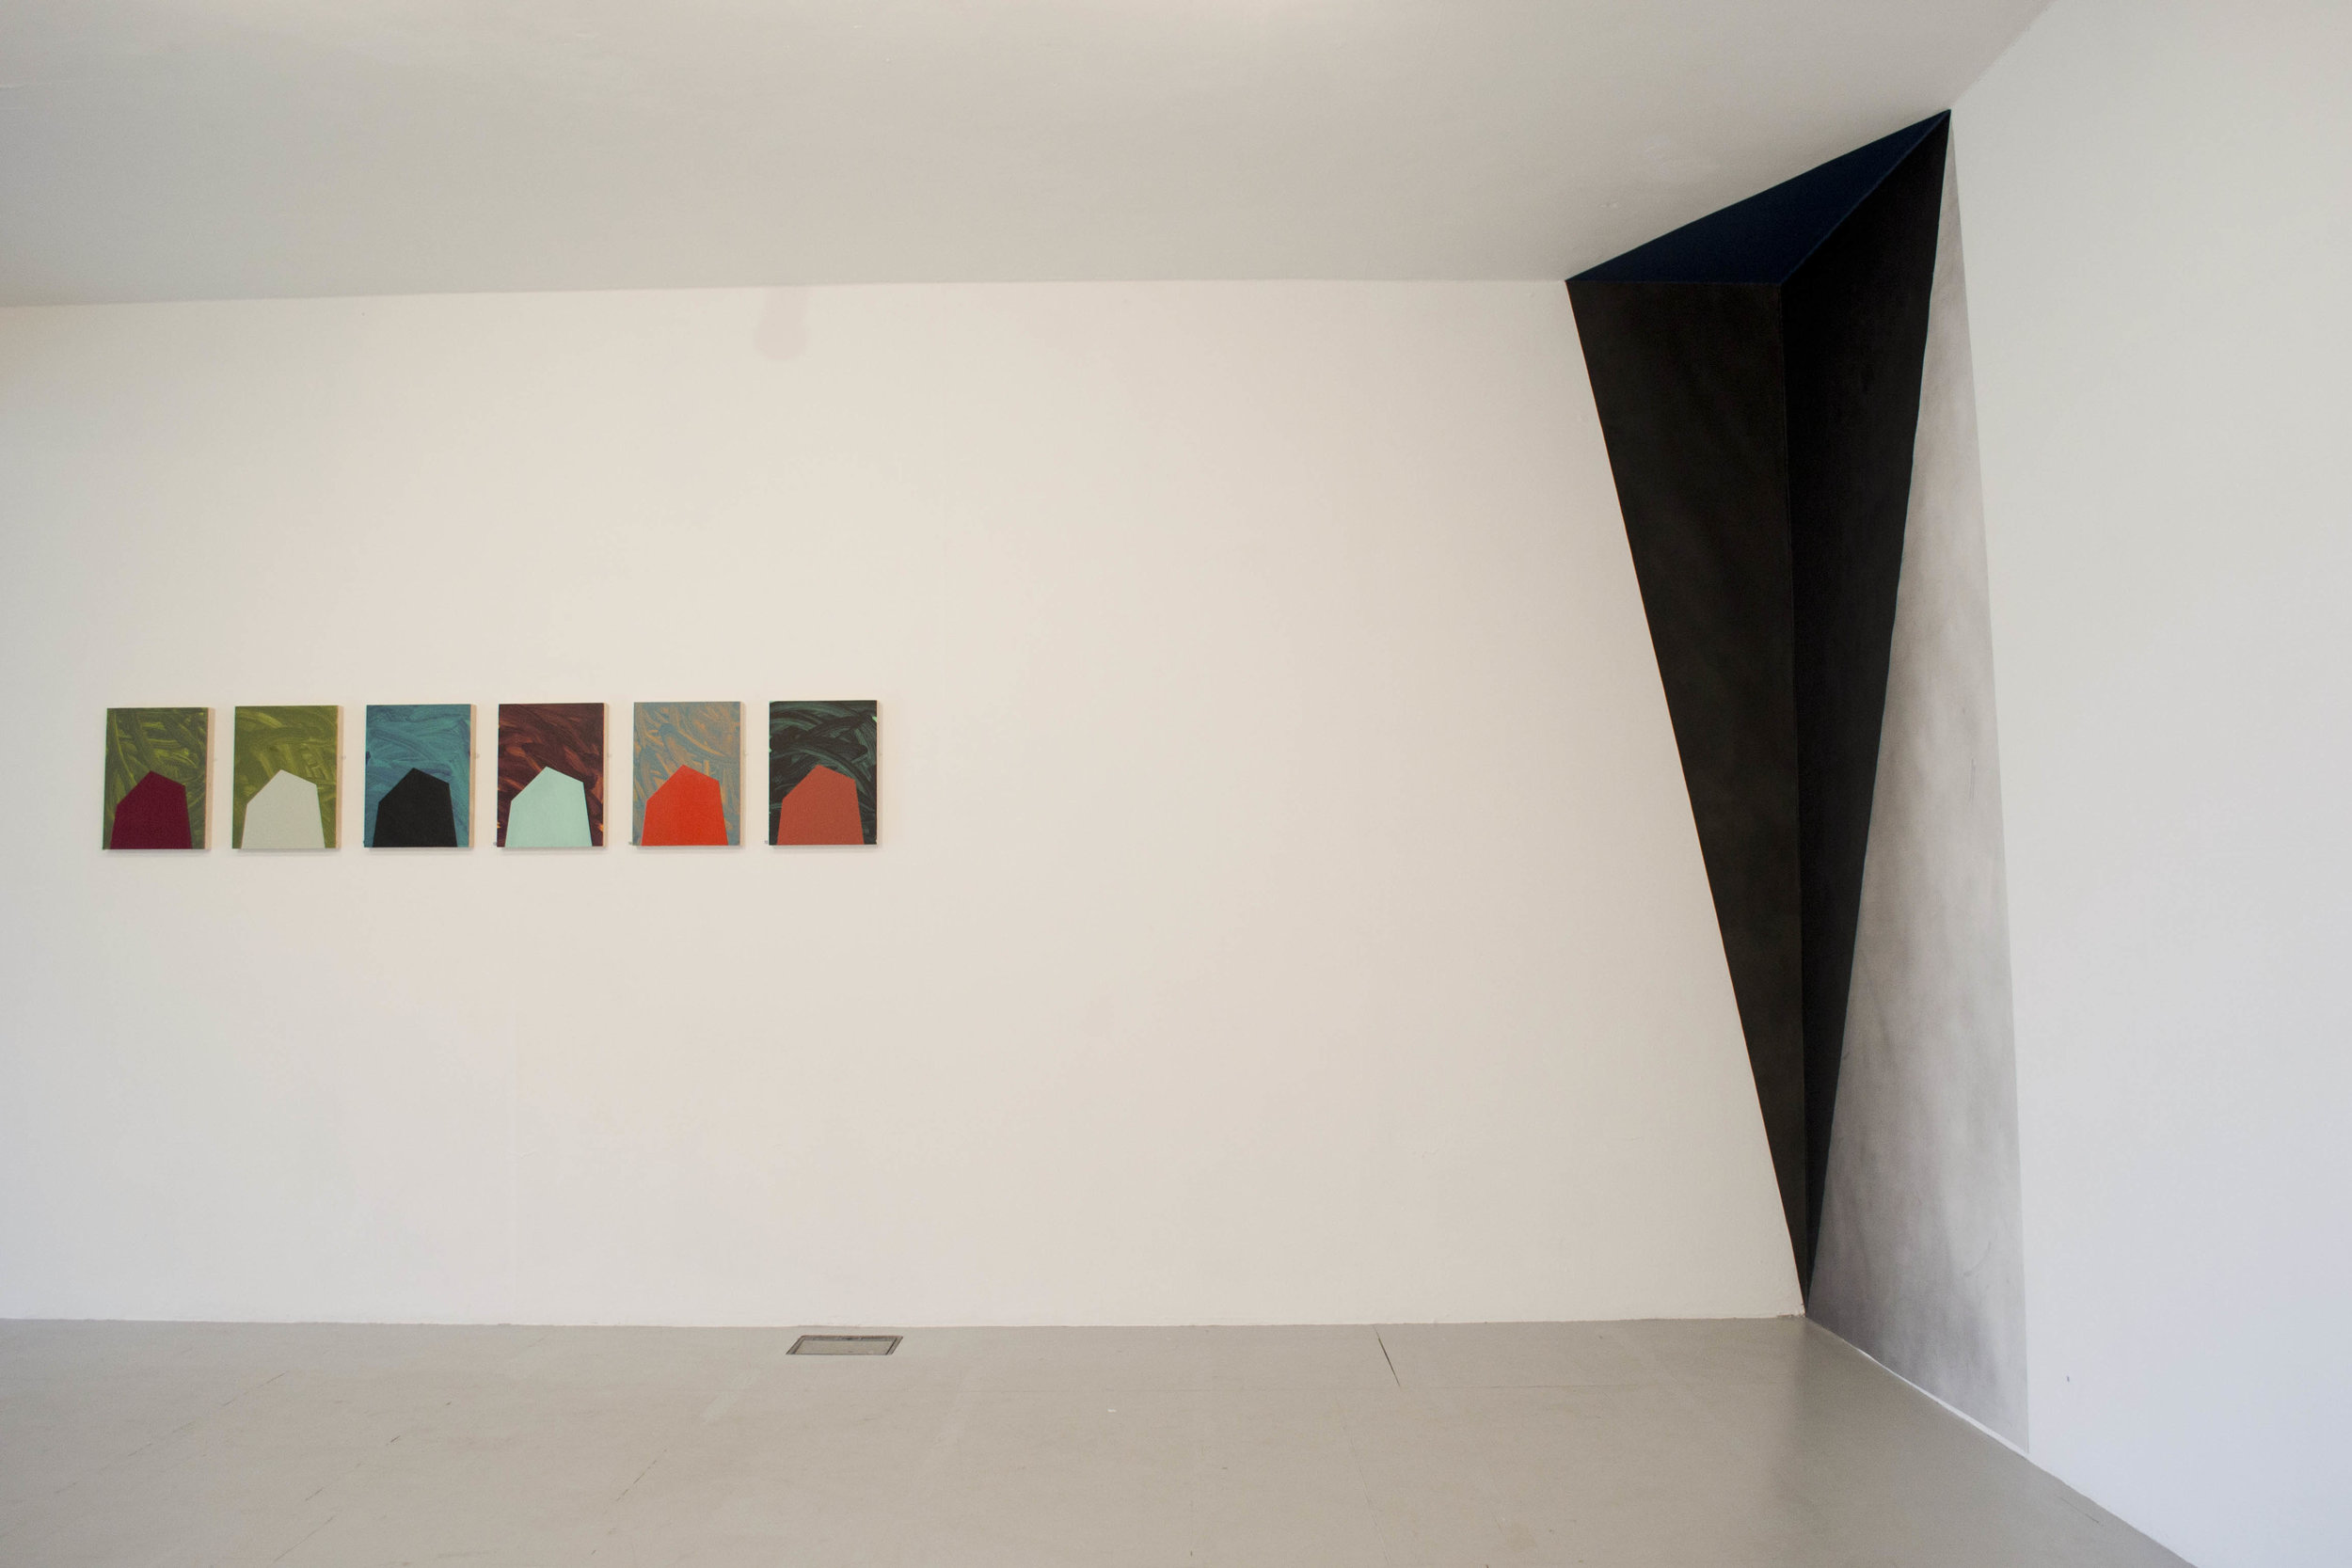 Floor to Ceiling Patrick O'Donnell and Tower series Johanna Melvin in situ Hardpainting.jpg